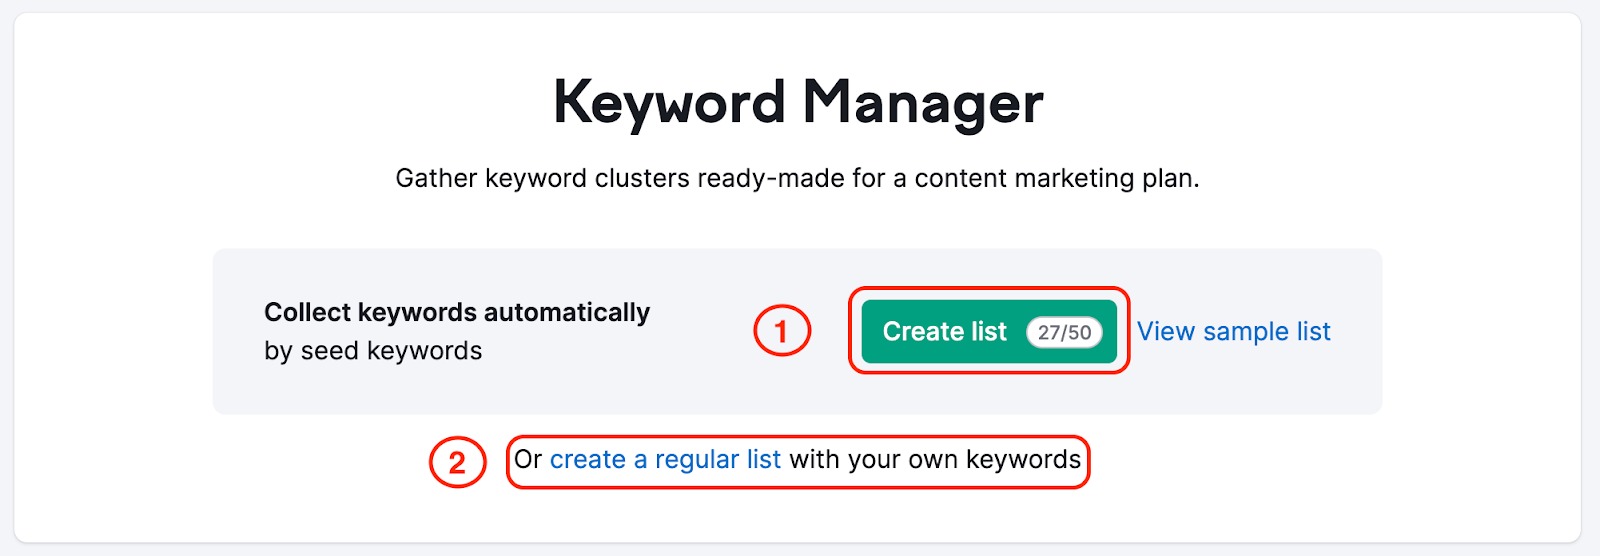 Keyword Manager landing page with red rectangles highlighting the Create list button that creates a clustered list, and a Create a regular list button below. 